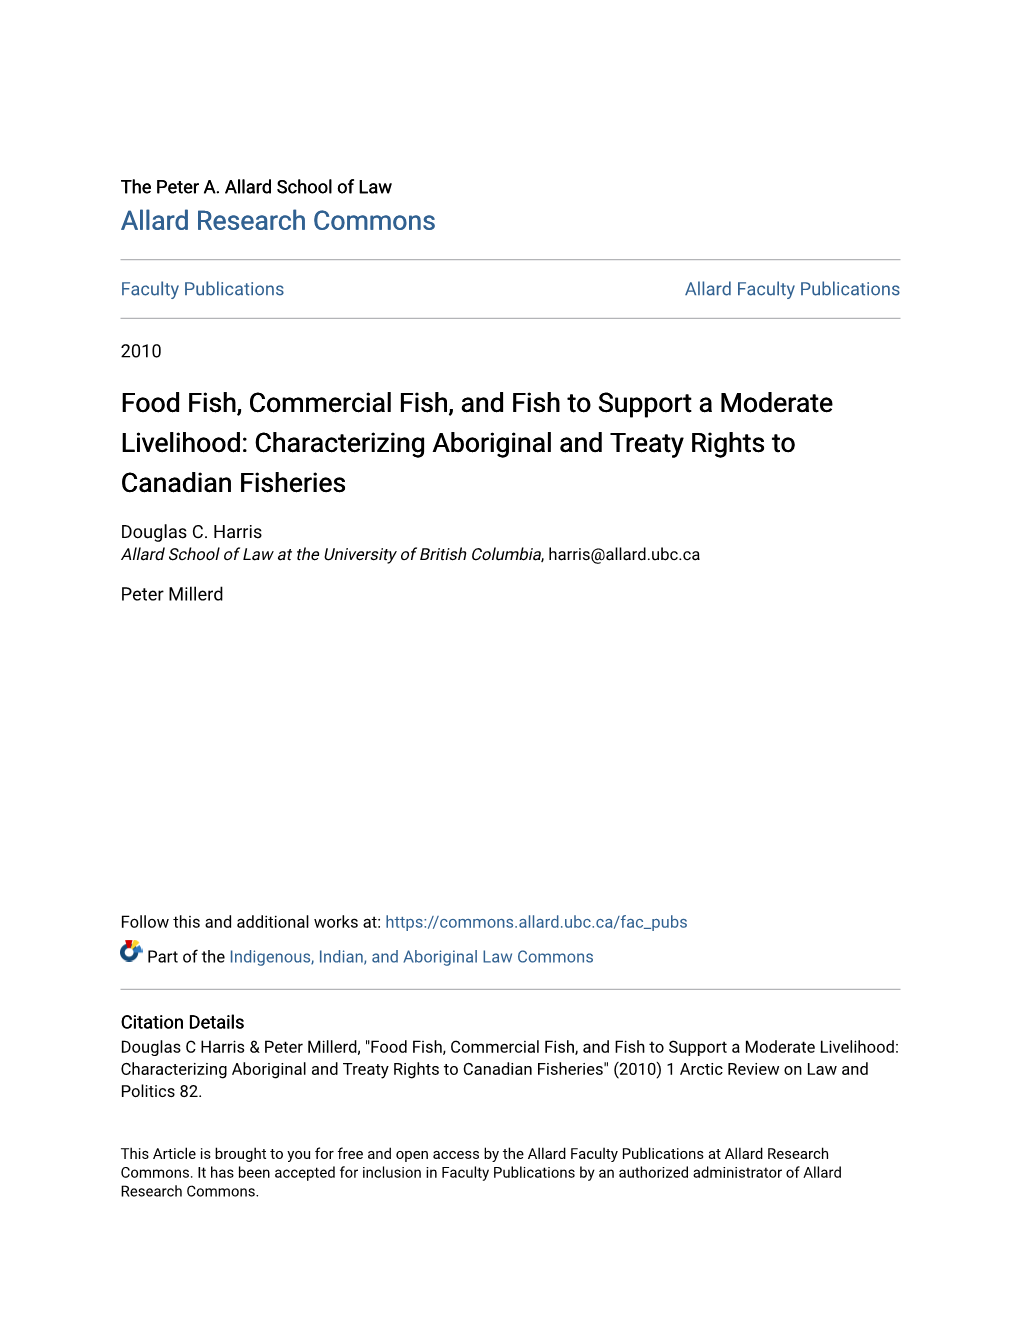 Food Fish, Commercial Fish, and Fish to Support a Moderate Livelihood: Characterizing Aboriginal and Treaty Rights to Canadian Fisheries